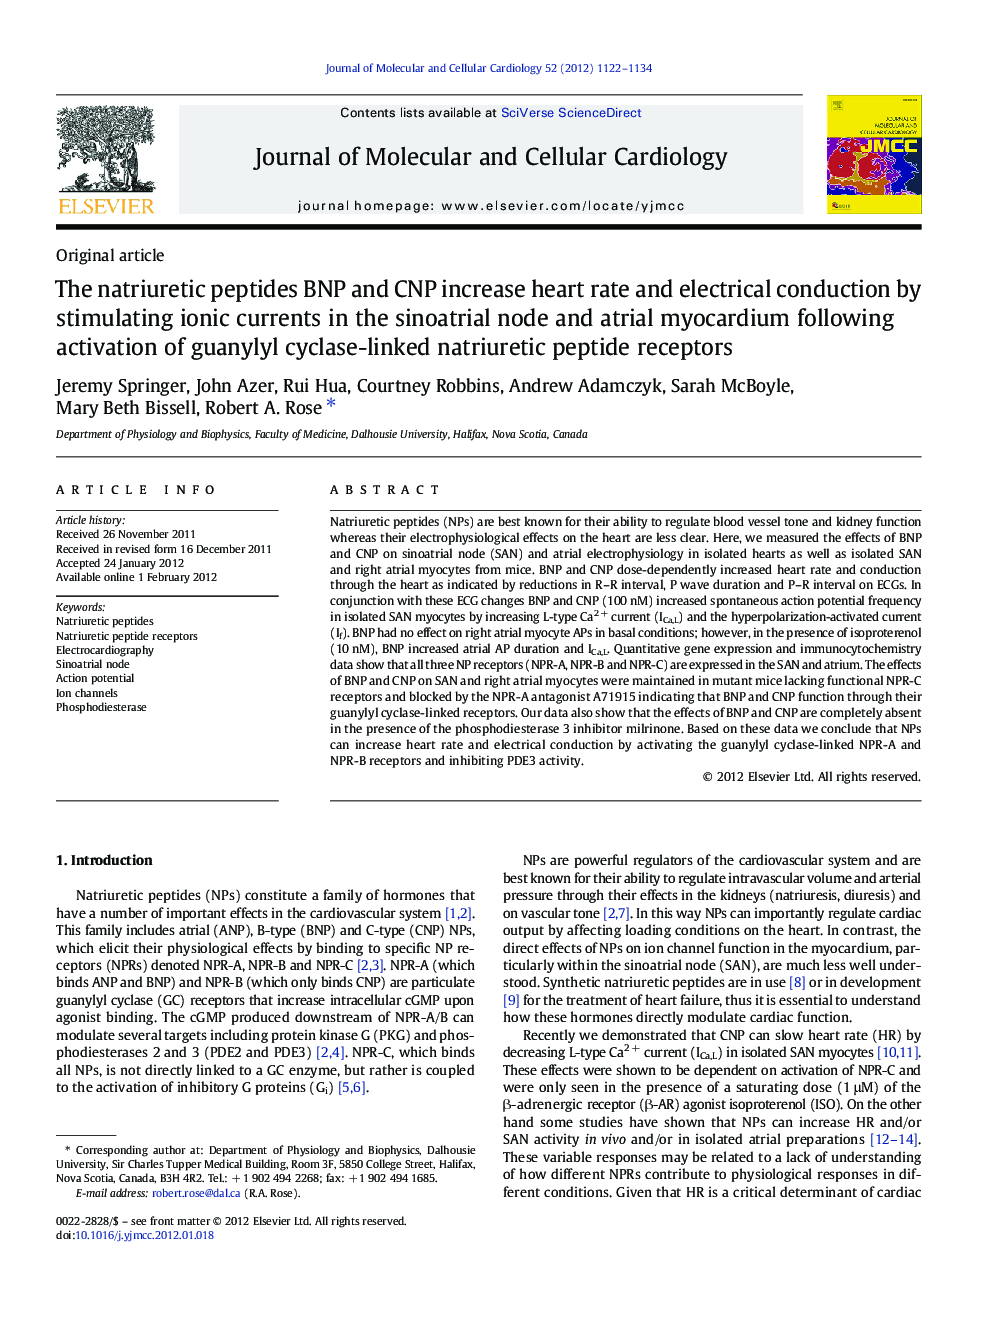 The natriuretic peptides BNP and CNP increase heart rate and electrical conduction by stimulating ionic currents in the sinoatrial node and atrial myocardium following activation of guanylyl cyclase-linked natriuretic peptide receptors